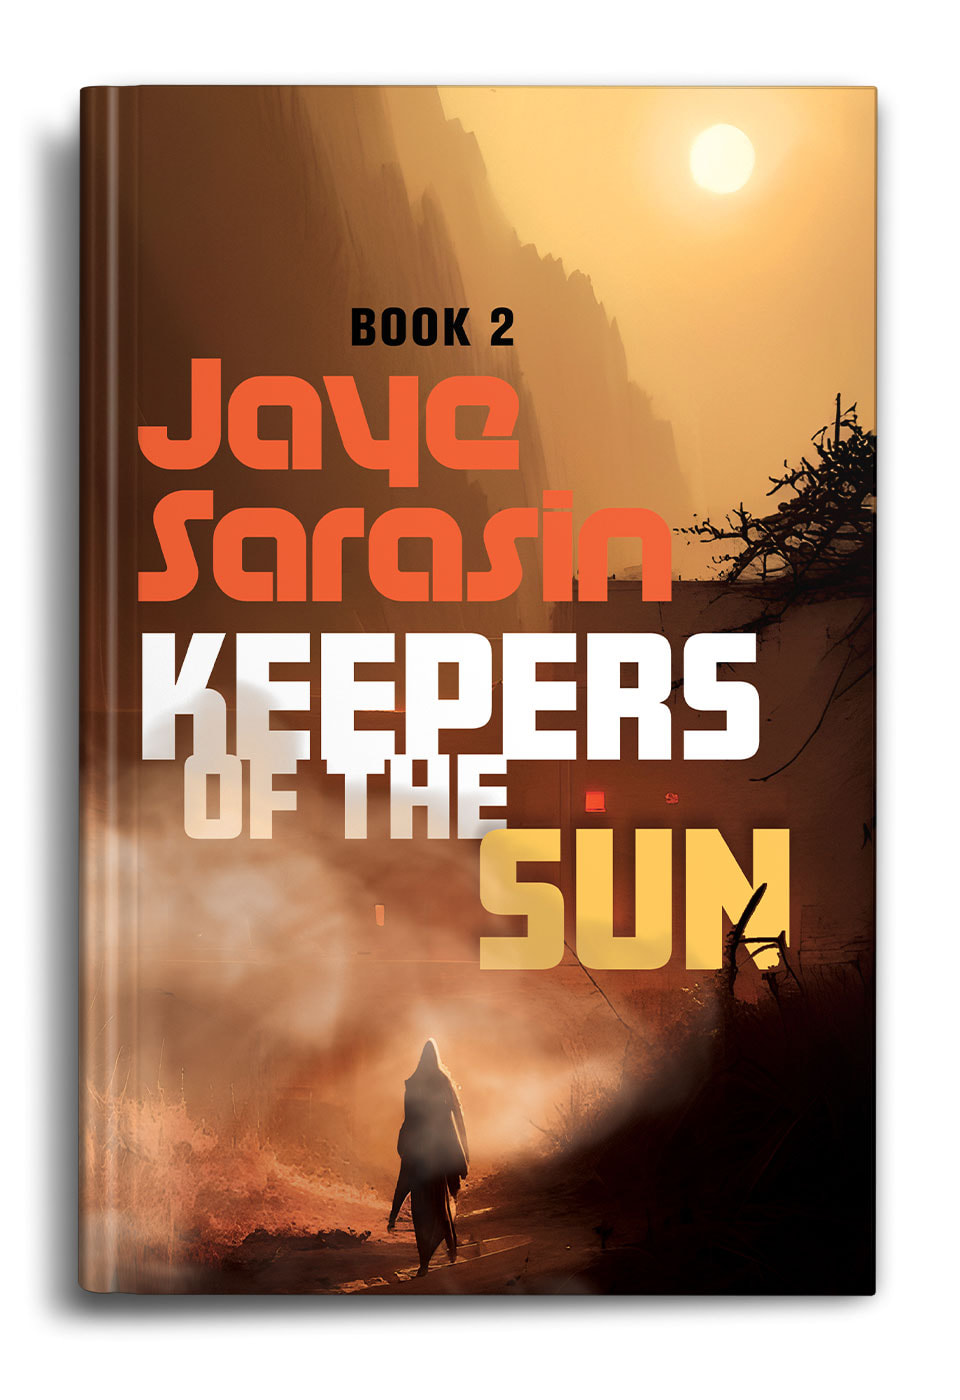 Keepers-of-the-Sun-by-Jaye-Sarasin